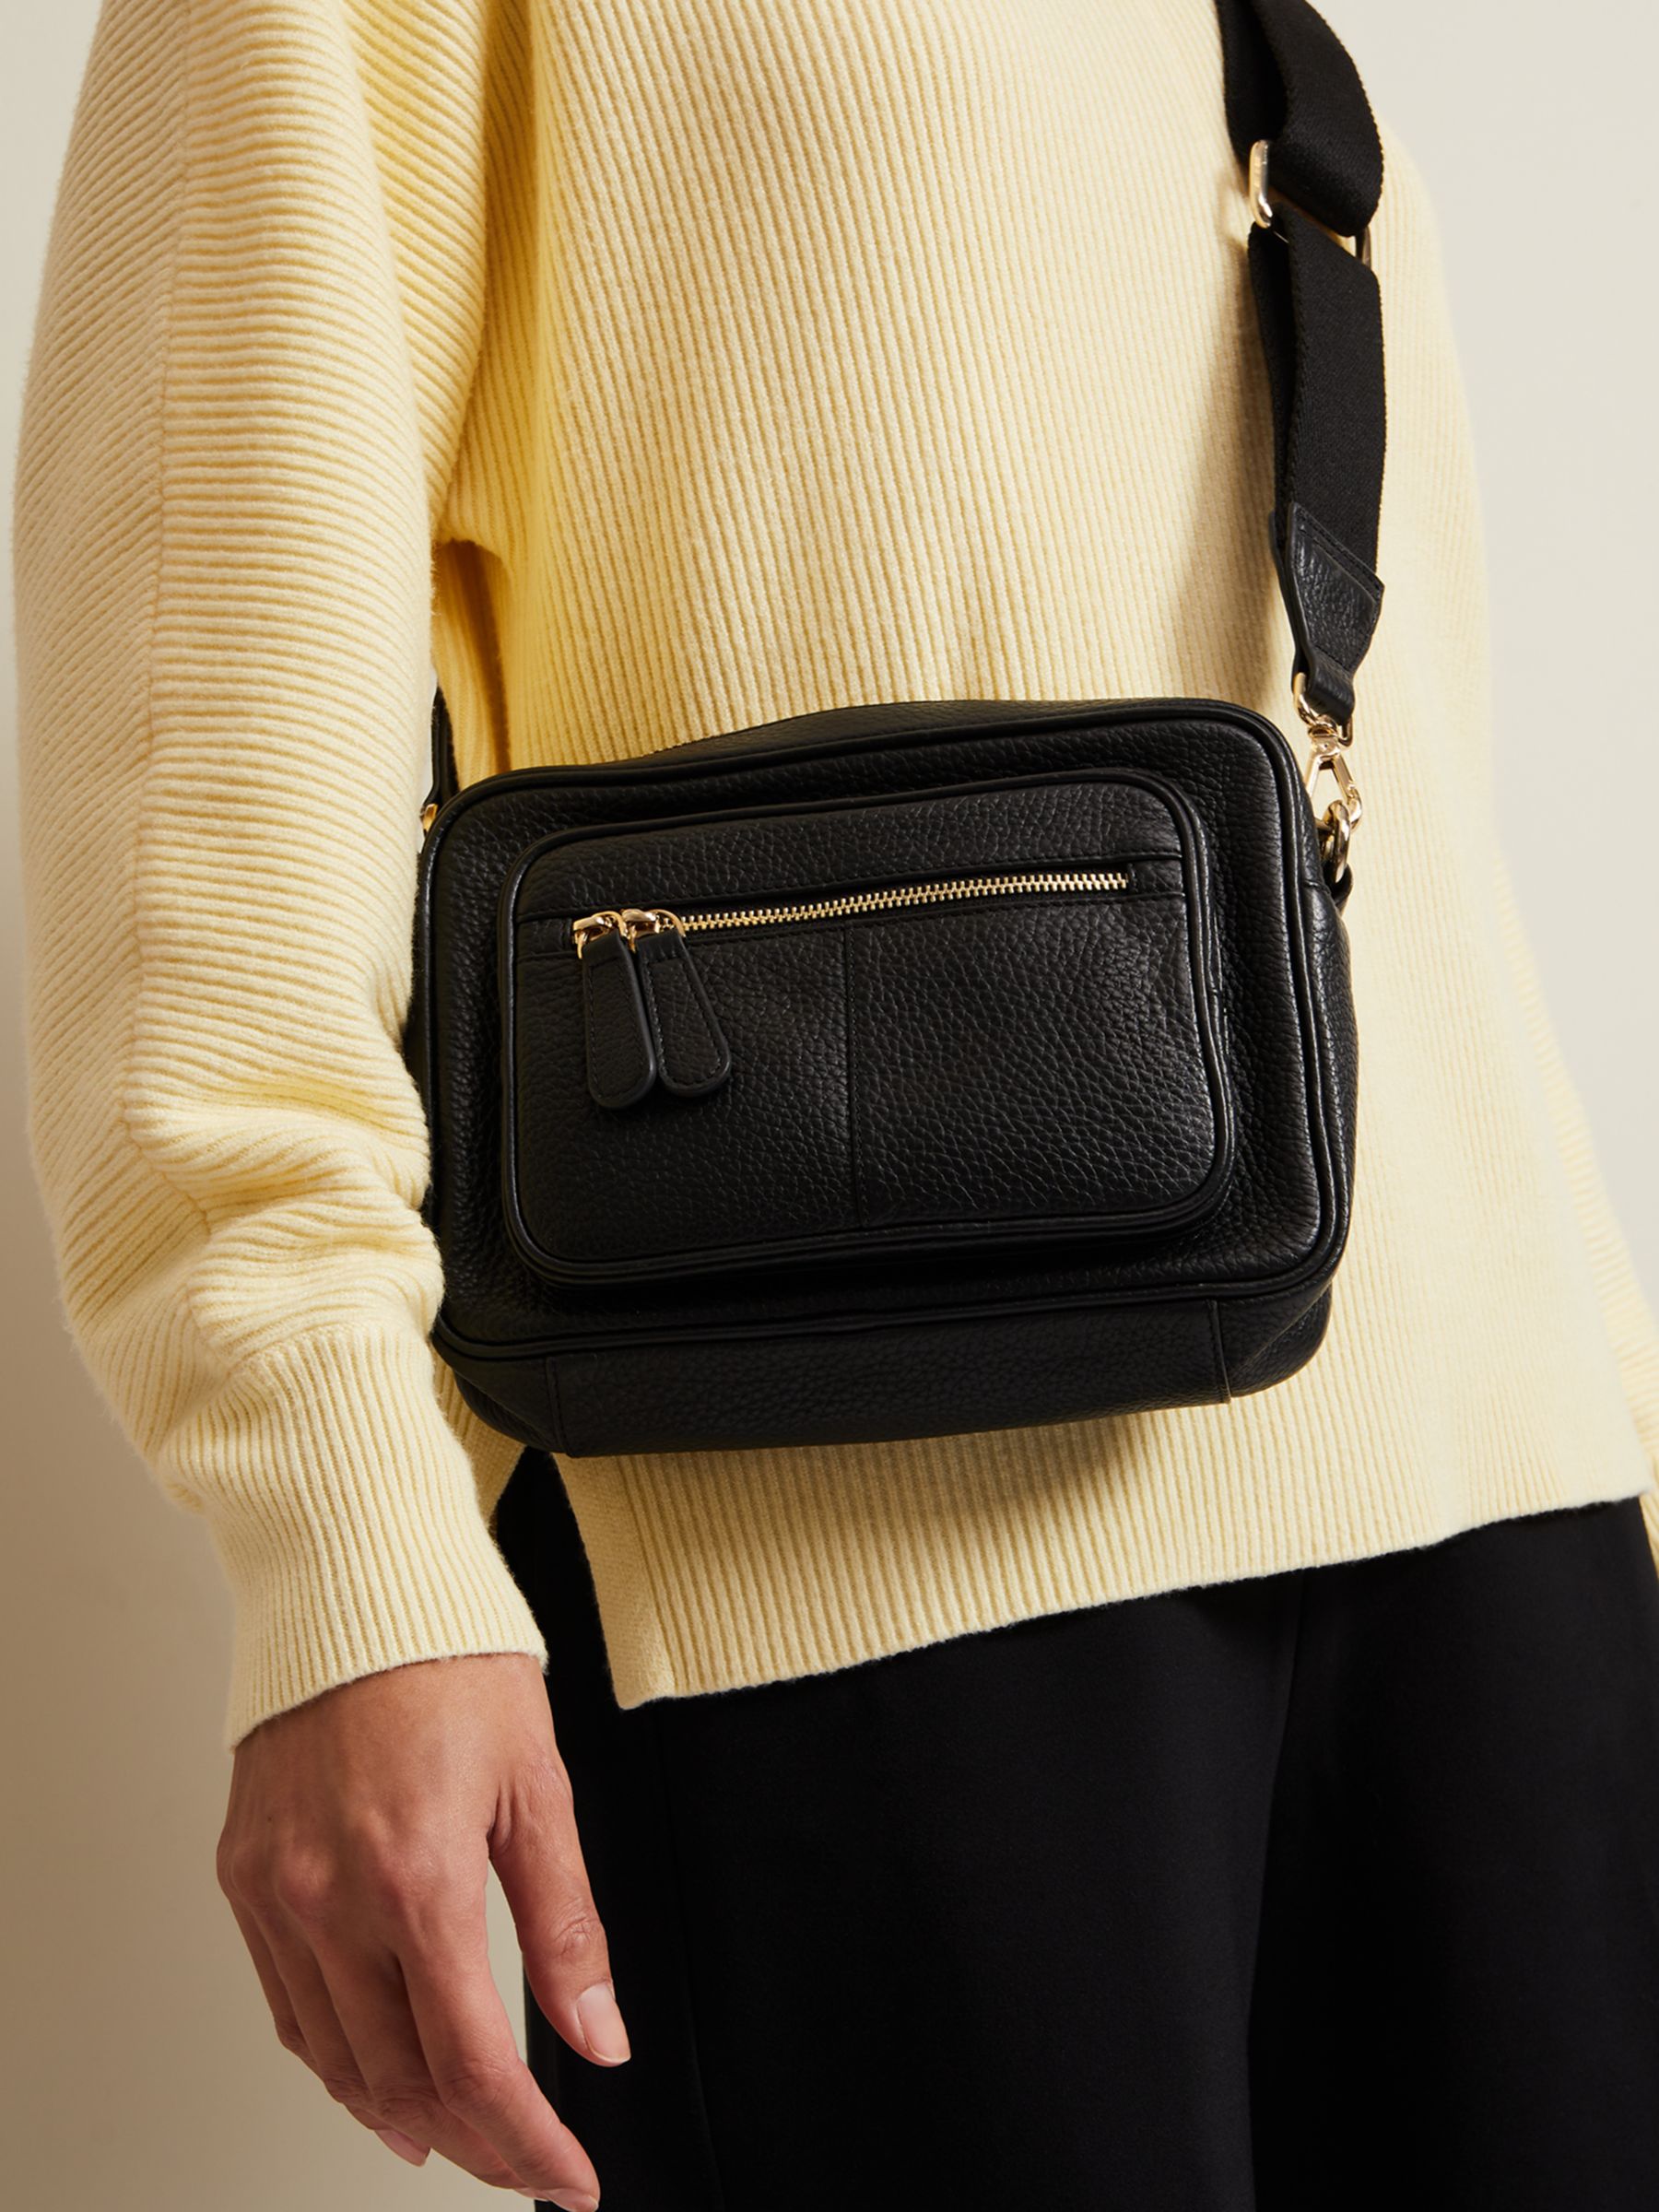 Buy Phase Eight Leather Cross Body Bag, Black Online at johnlewis.com